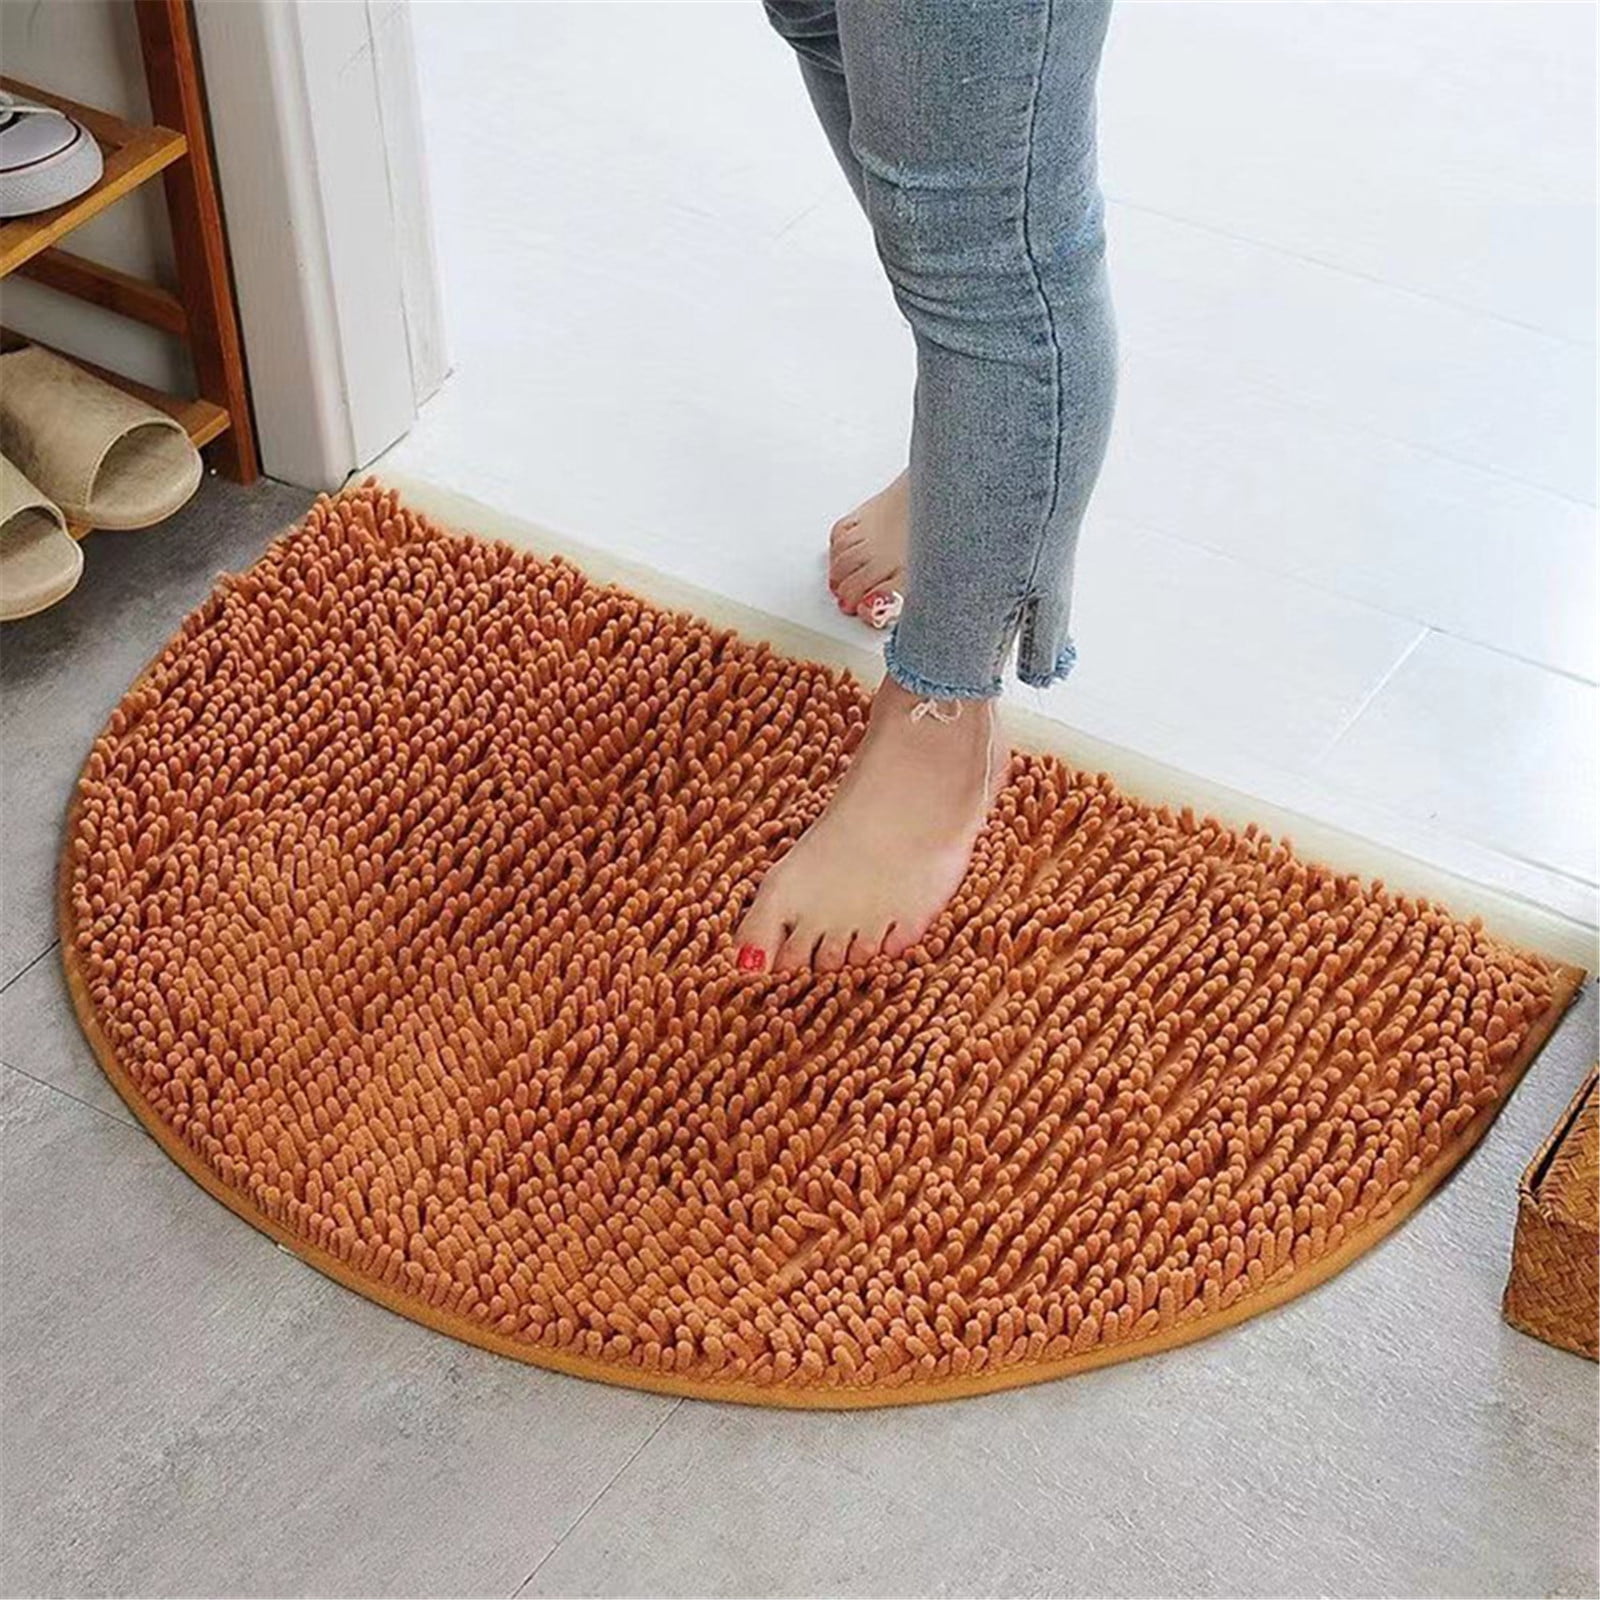 Area Rug Pads for Floors Color Water Drop Decorative Pattern Living Bedroom Non-slip water uptake Washable Cozy Shaggy durable 36 x 24 inch 